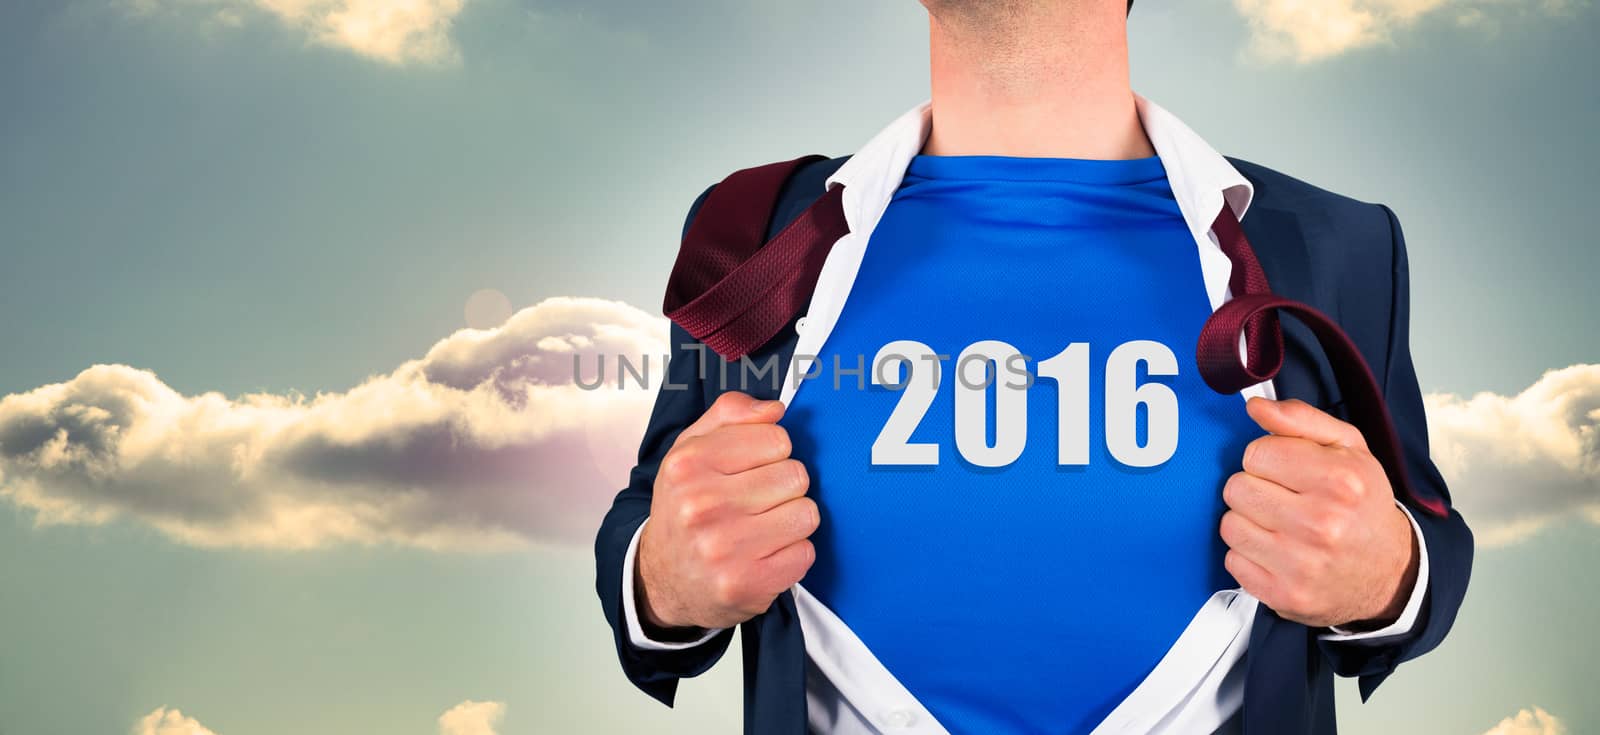 Businessman opening his shirt superhero style against bright blue sky with cloud